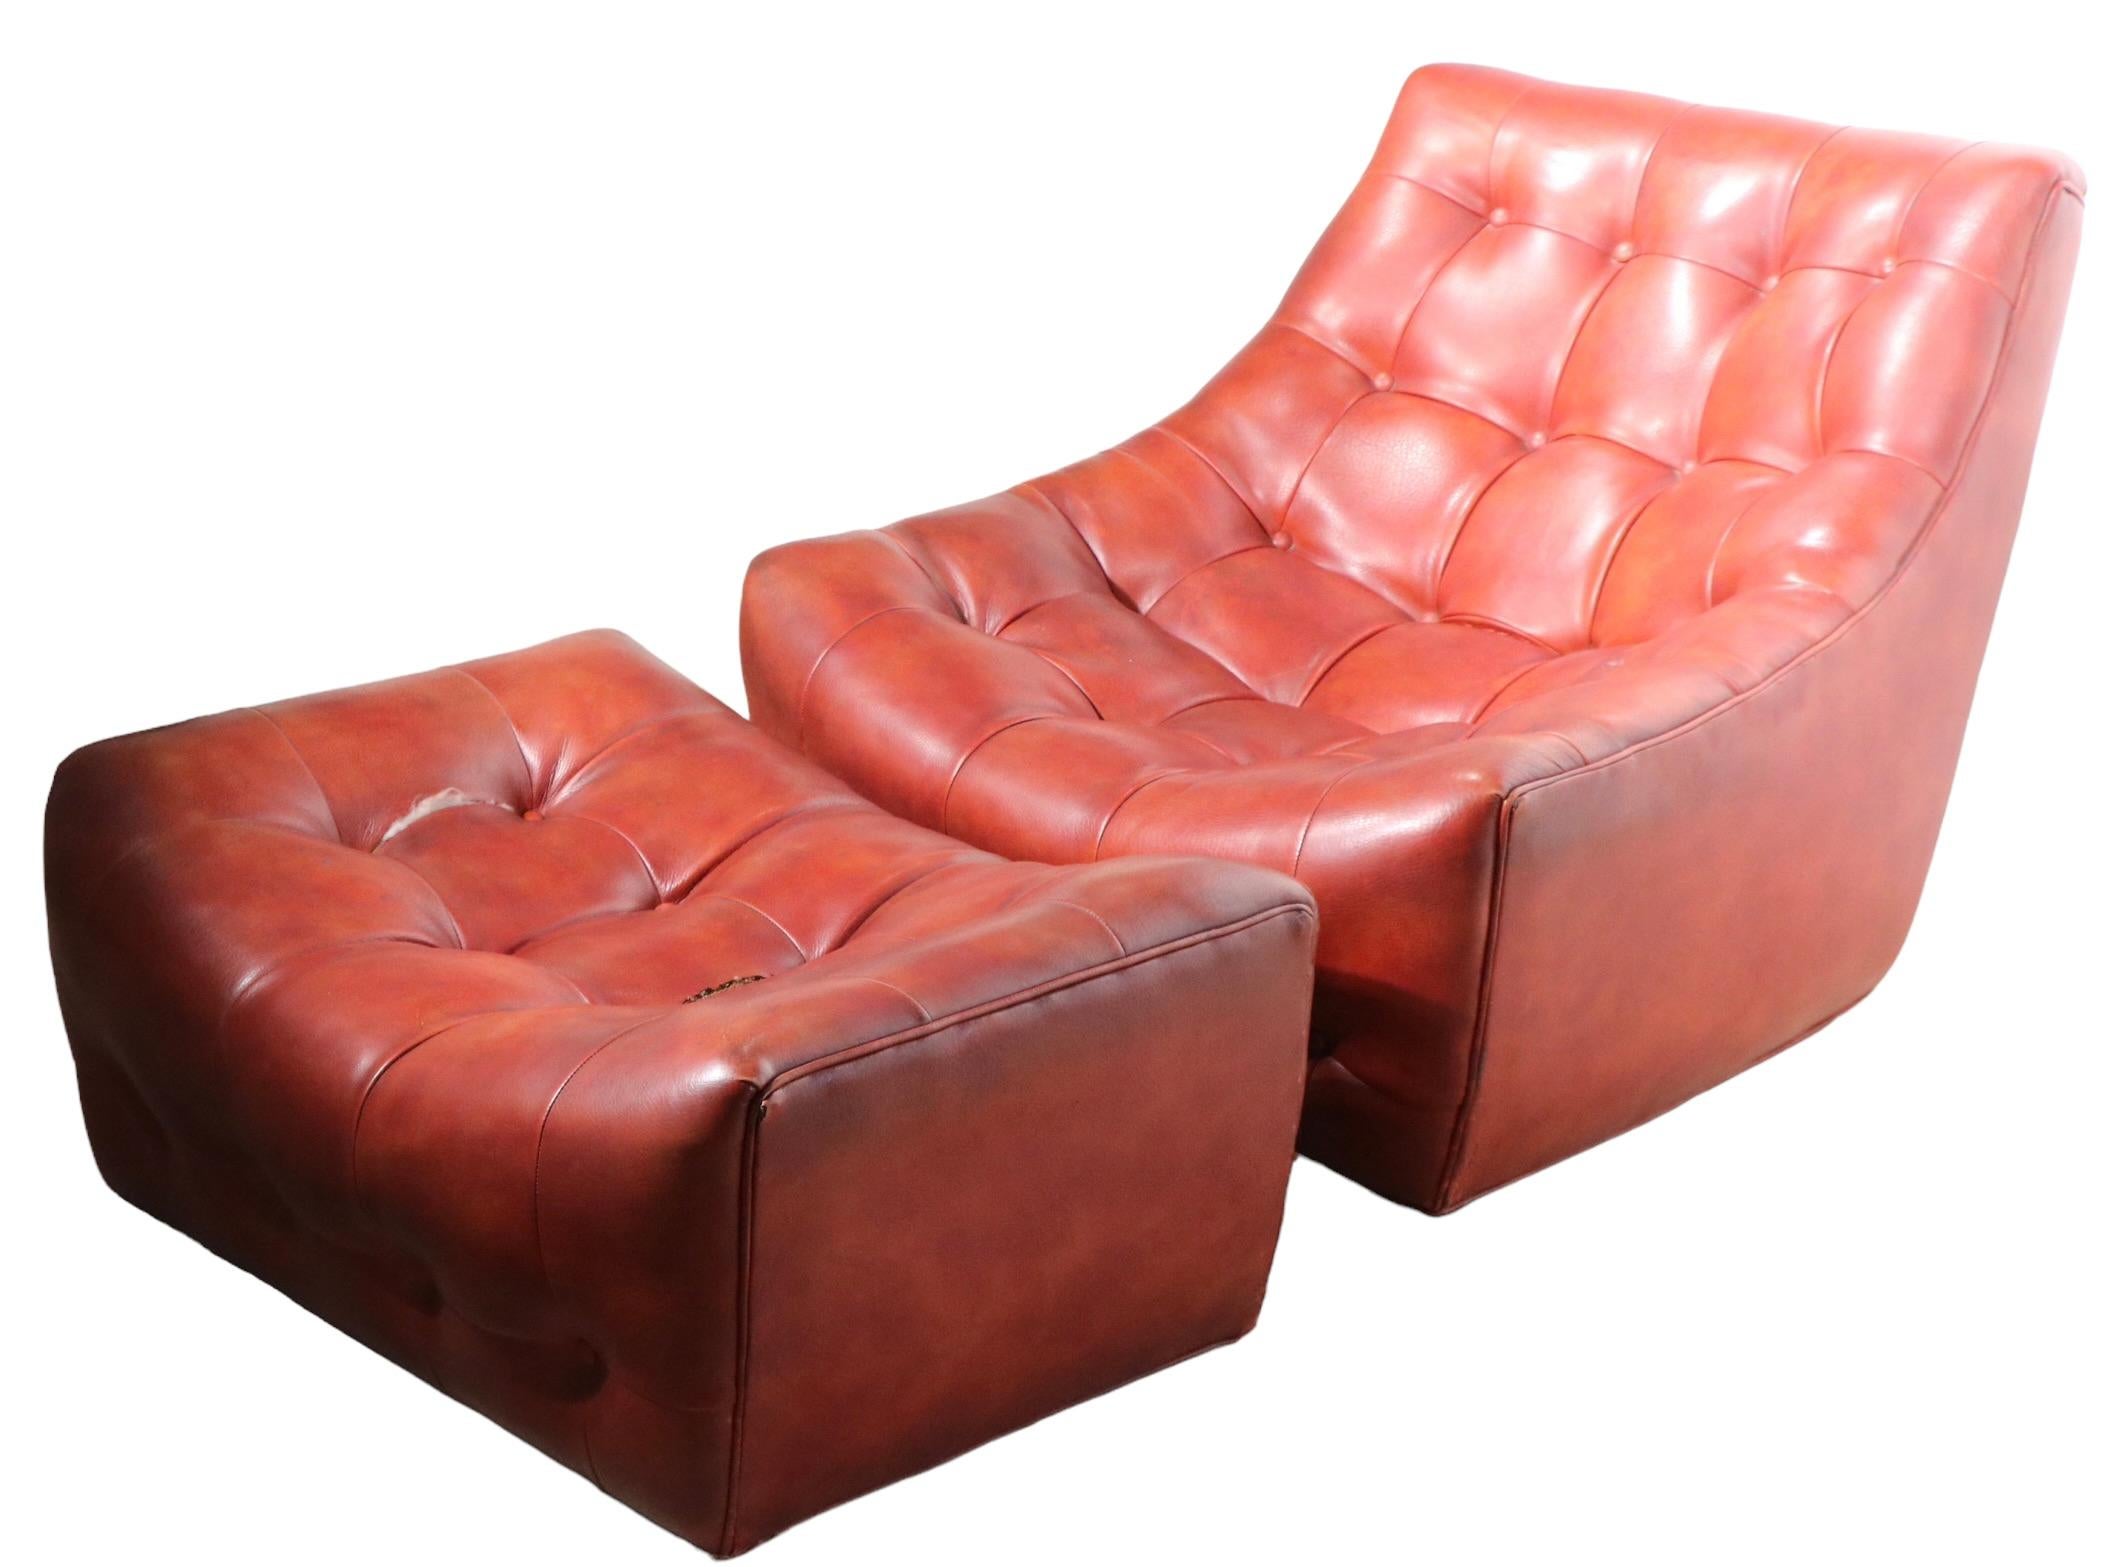 Rare scoop form lounge chair and ottoman designed by Milo Baughman, produced by Thayer Coggin, circa 1970's. The chair is upholstered in faux leather vinyl, with button tufted surfaces, the ottoman shows two splits at the seams - please see images.